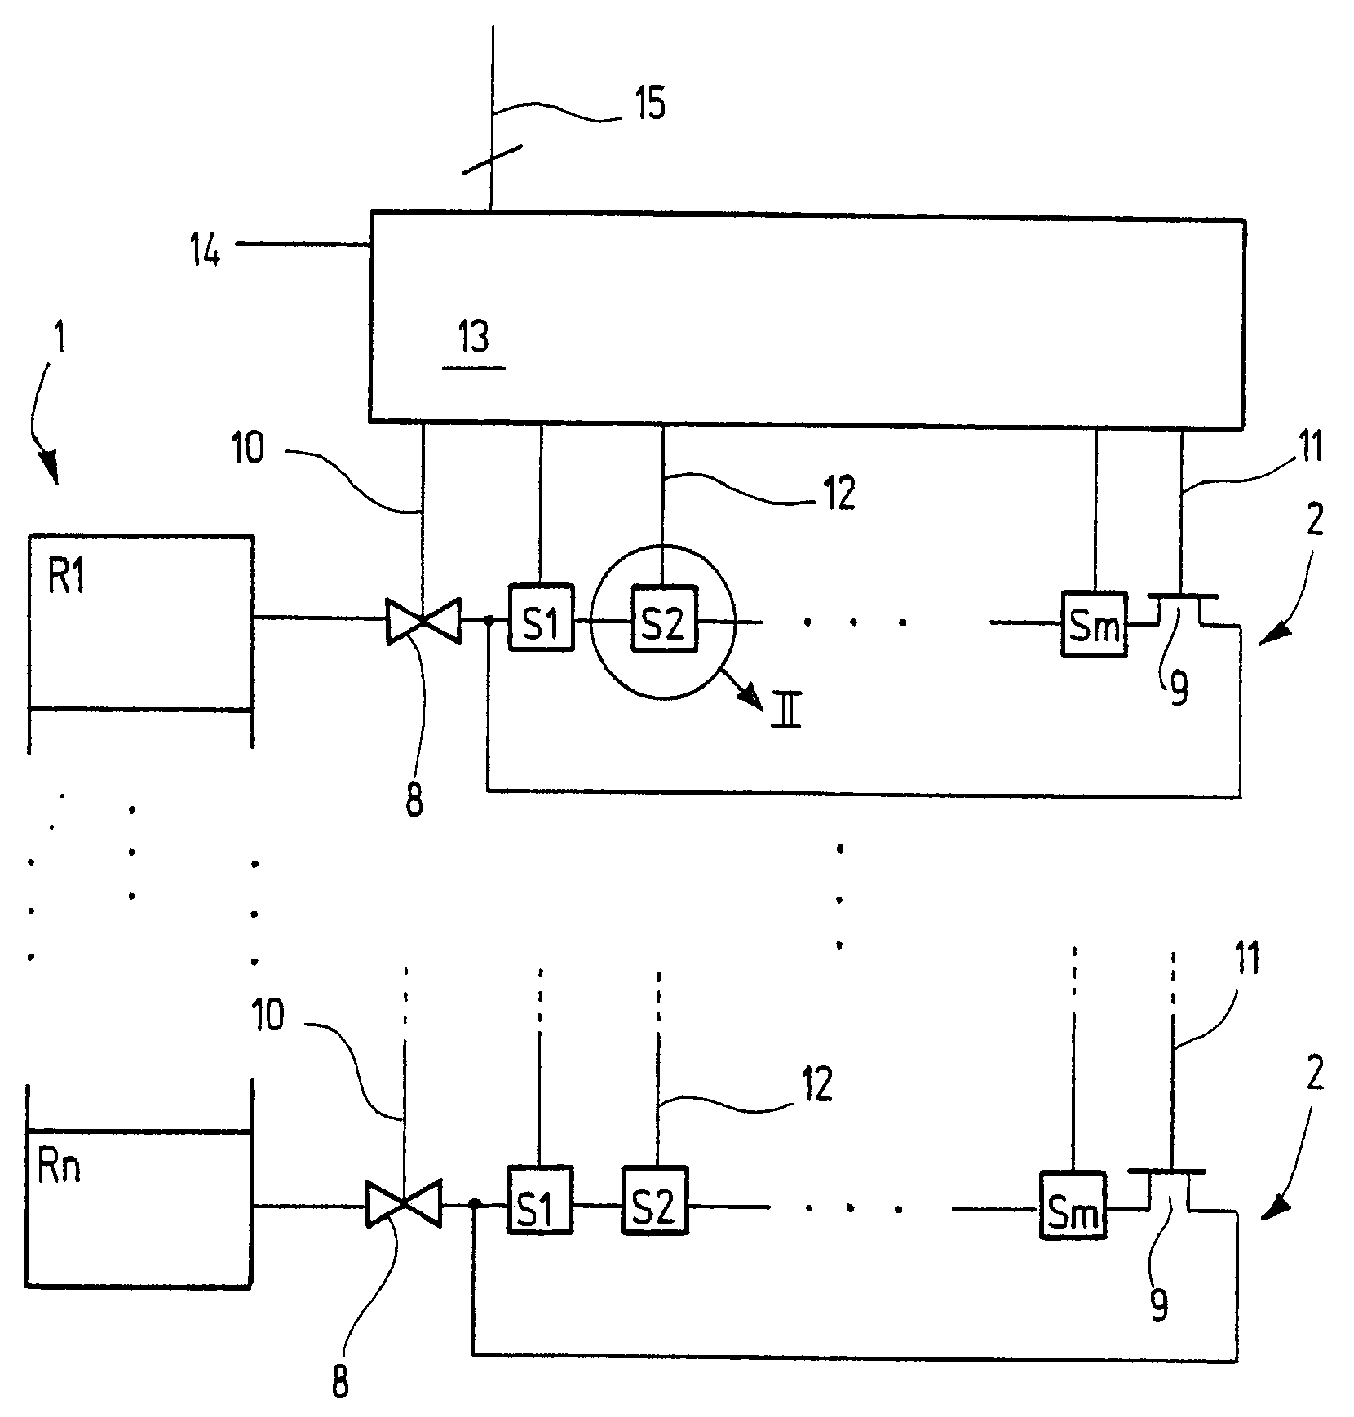 Register arrangement for microcomputer with register and further storage media